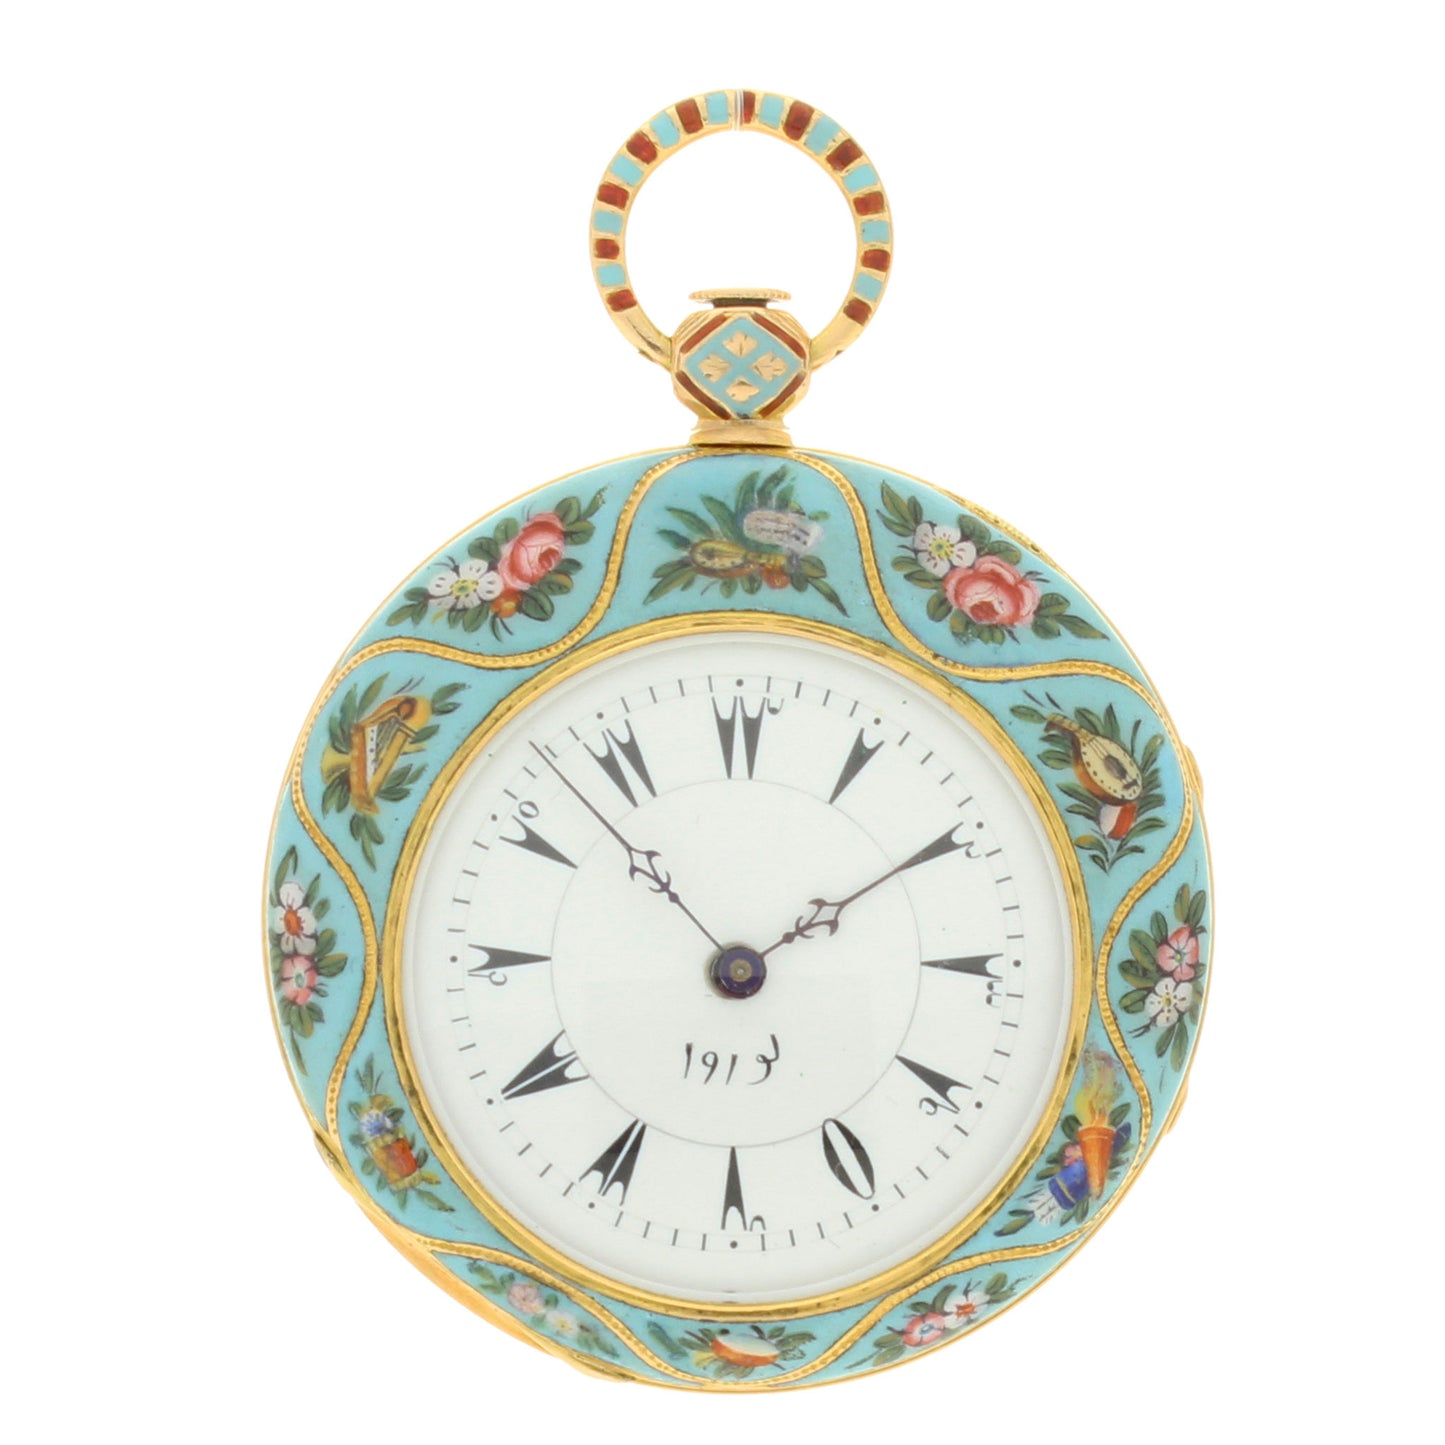 18ct yellow gold and enamel set open face pocket watch, made for the Turkish Market. Made 1840's